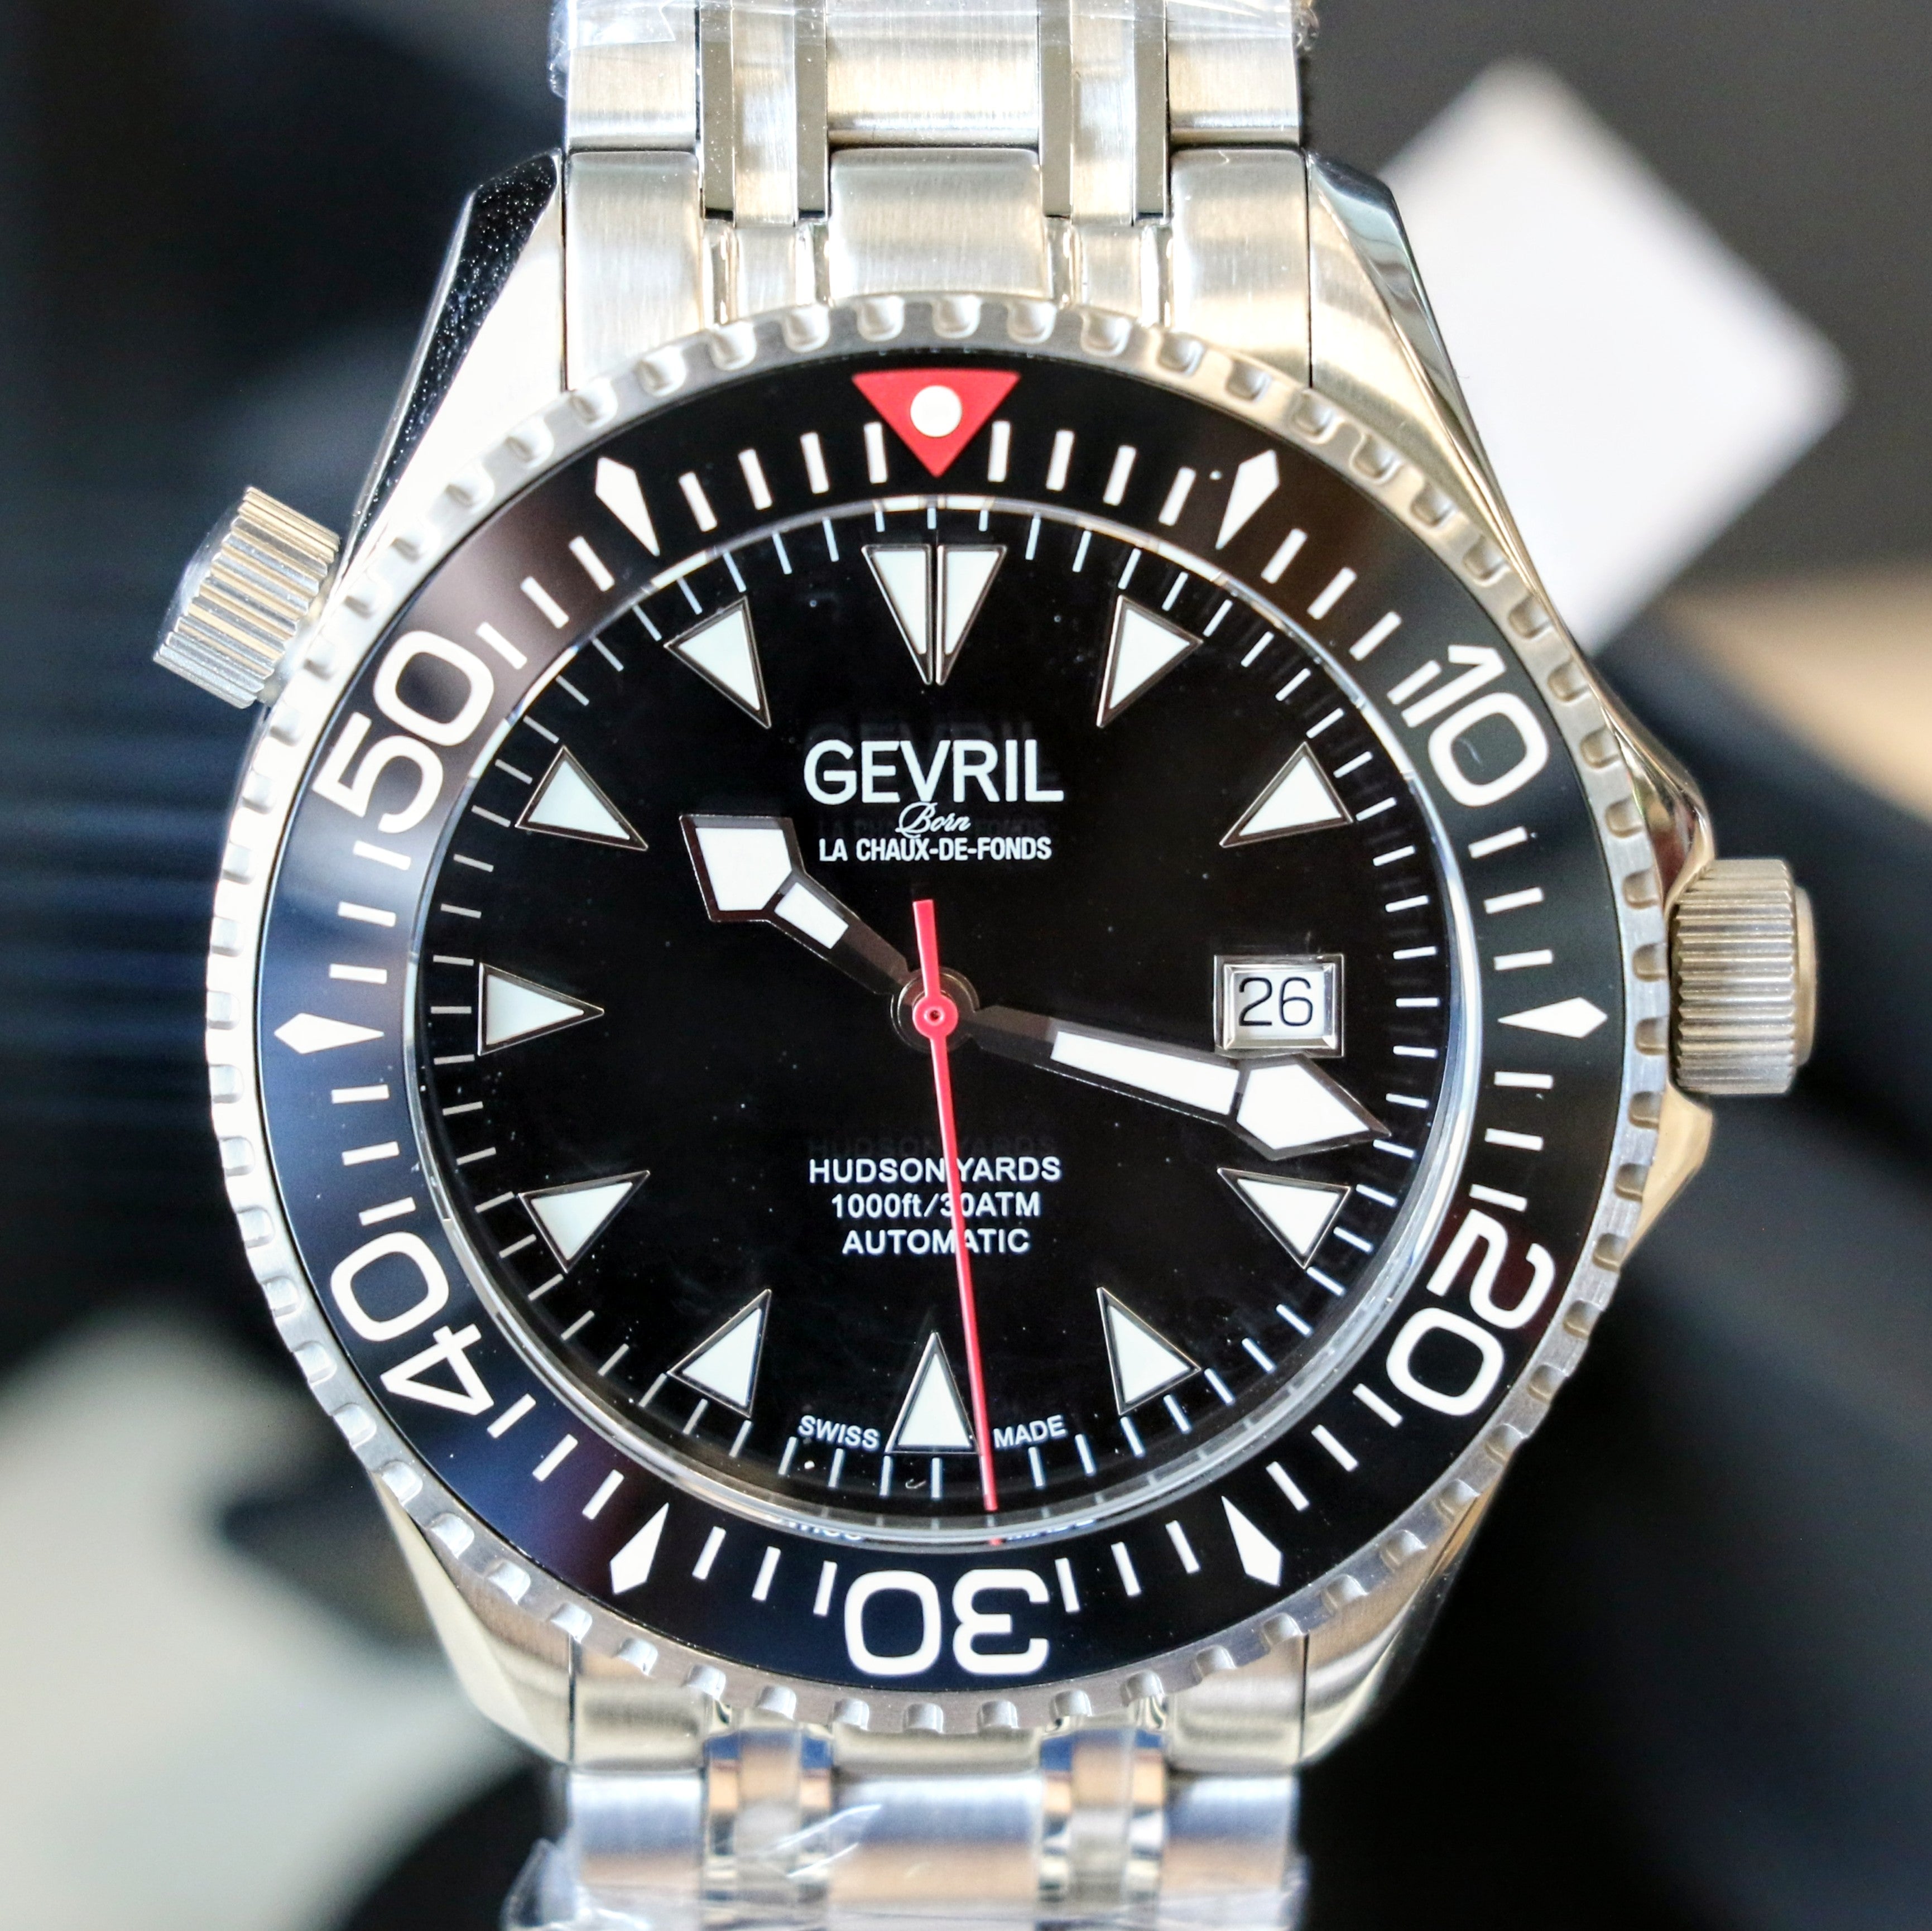 GEVRIL Hudson Yards Automatic Diver Watch Model 48800 - Display Back - BOX & Papers!